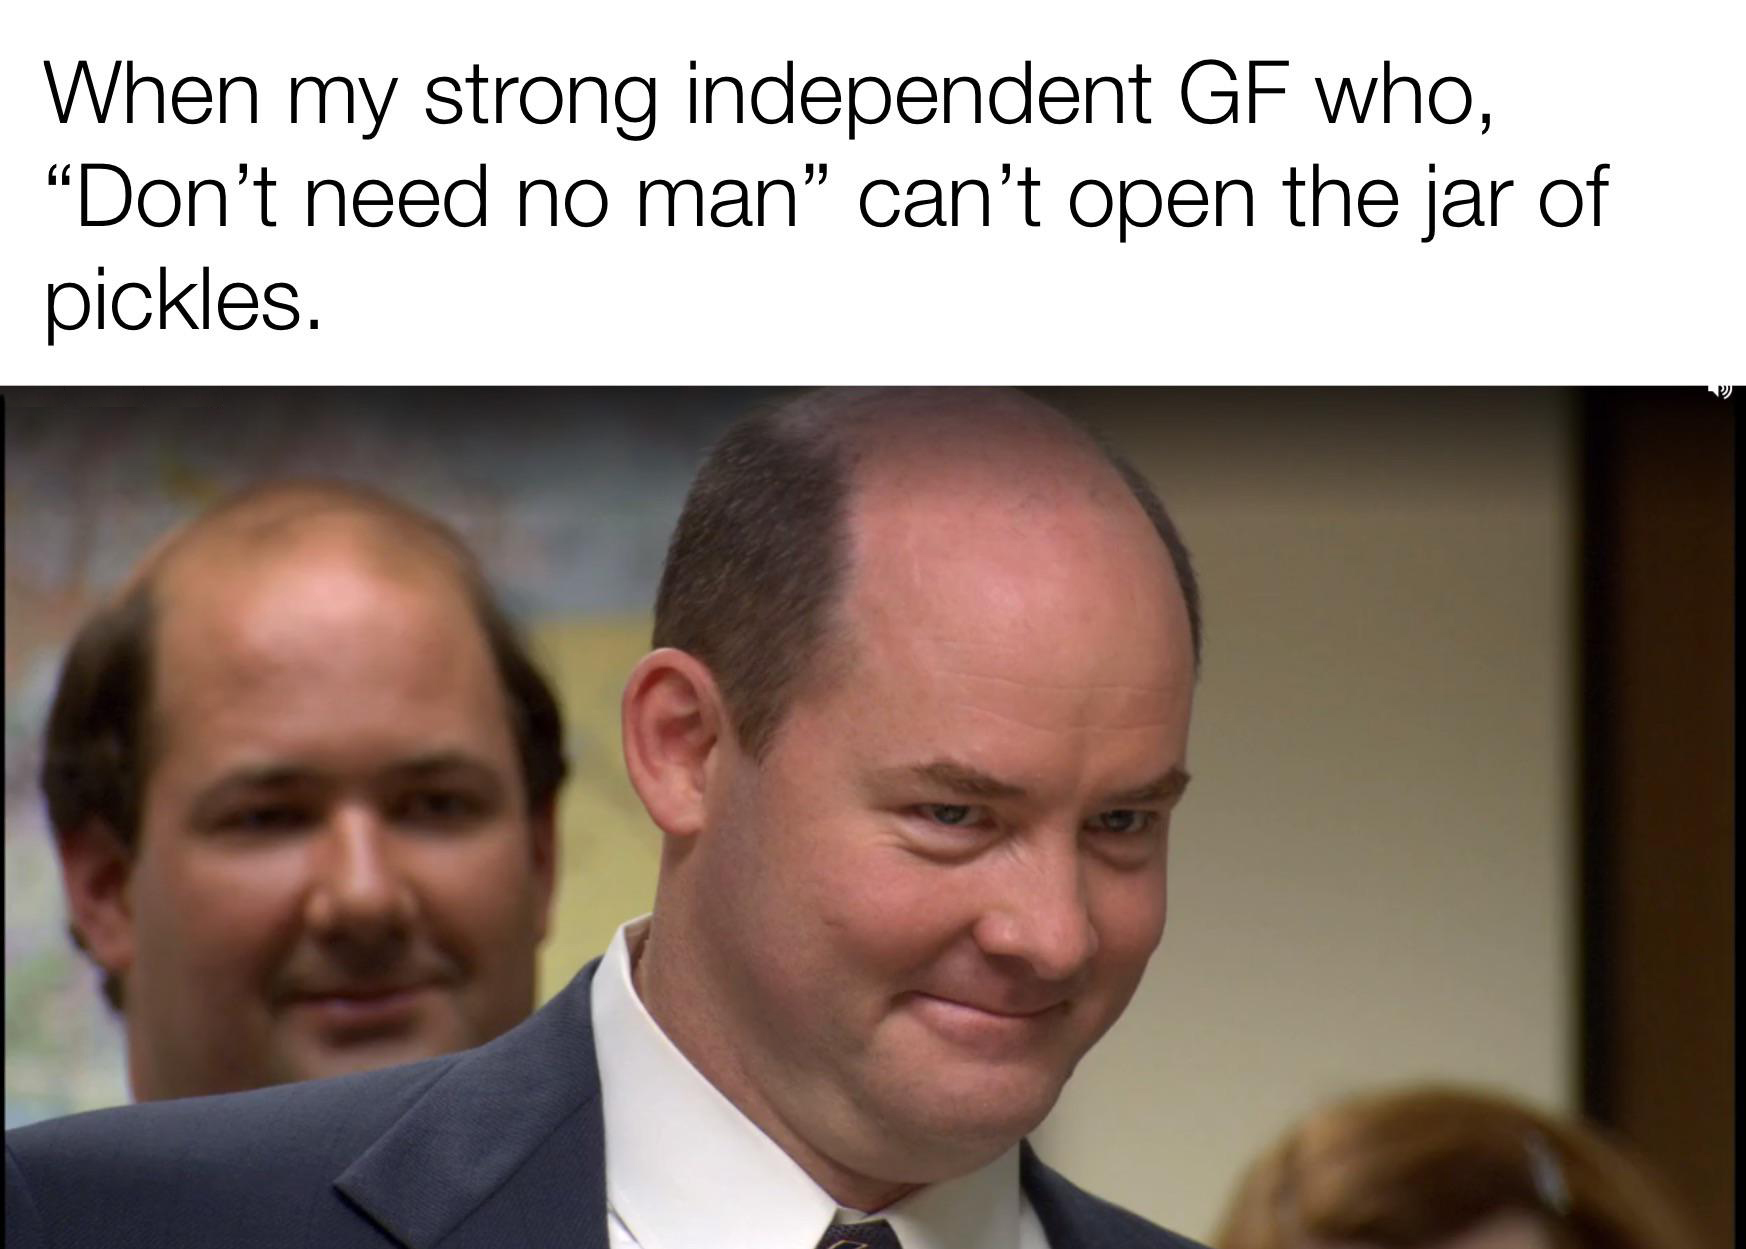 fresh memes - todd packer that's what she said - When my strong independent Gf who, Don't need no man can't open the jar of pickles.